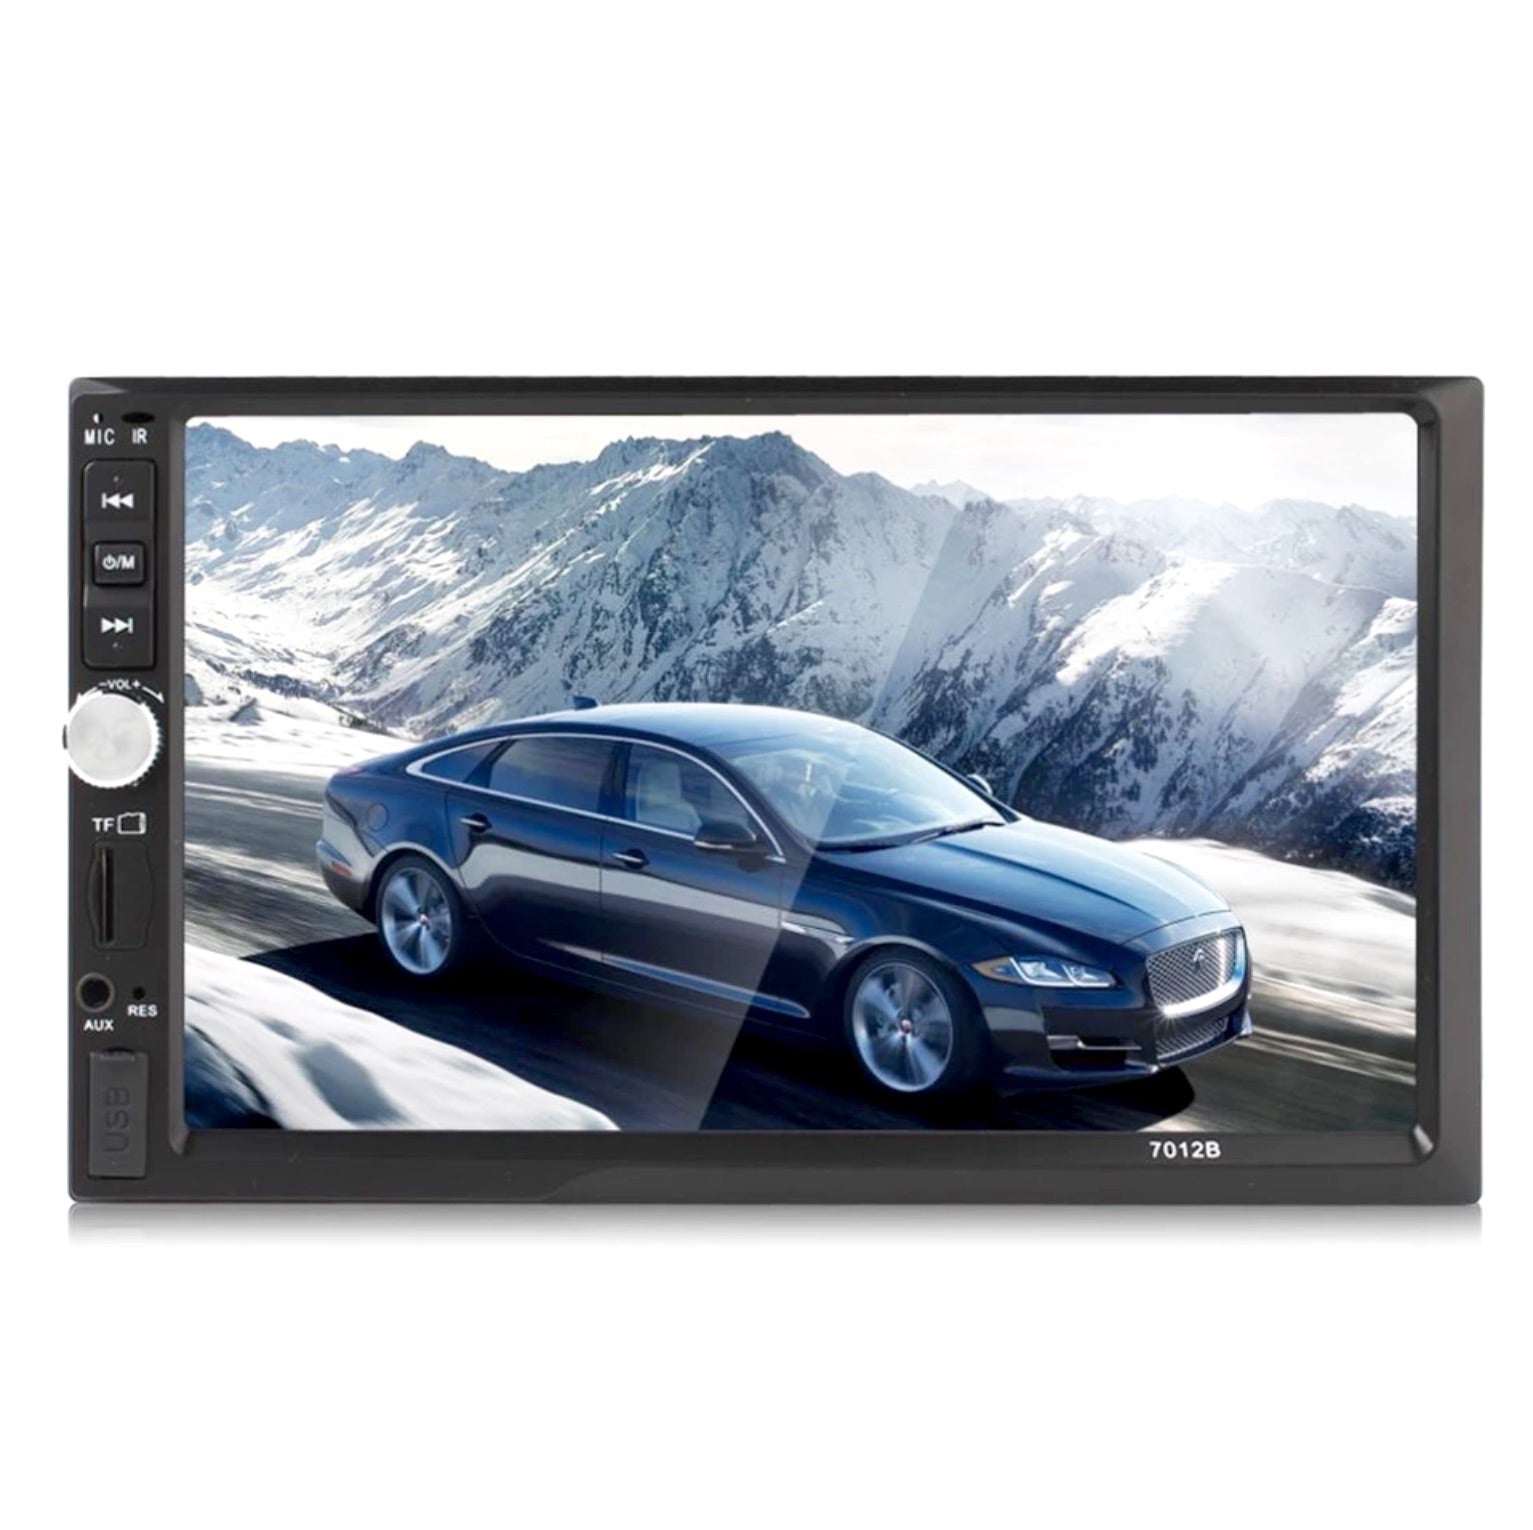 Car Stereo 2 DIN 7 inch Head Unit with Rear View Camera, Bluetooth, Touchscreen